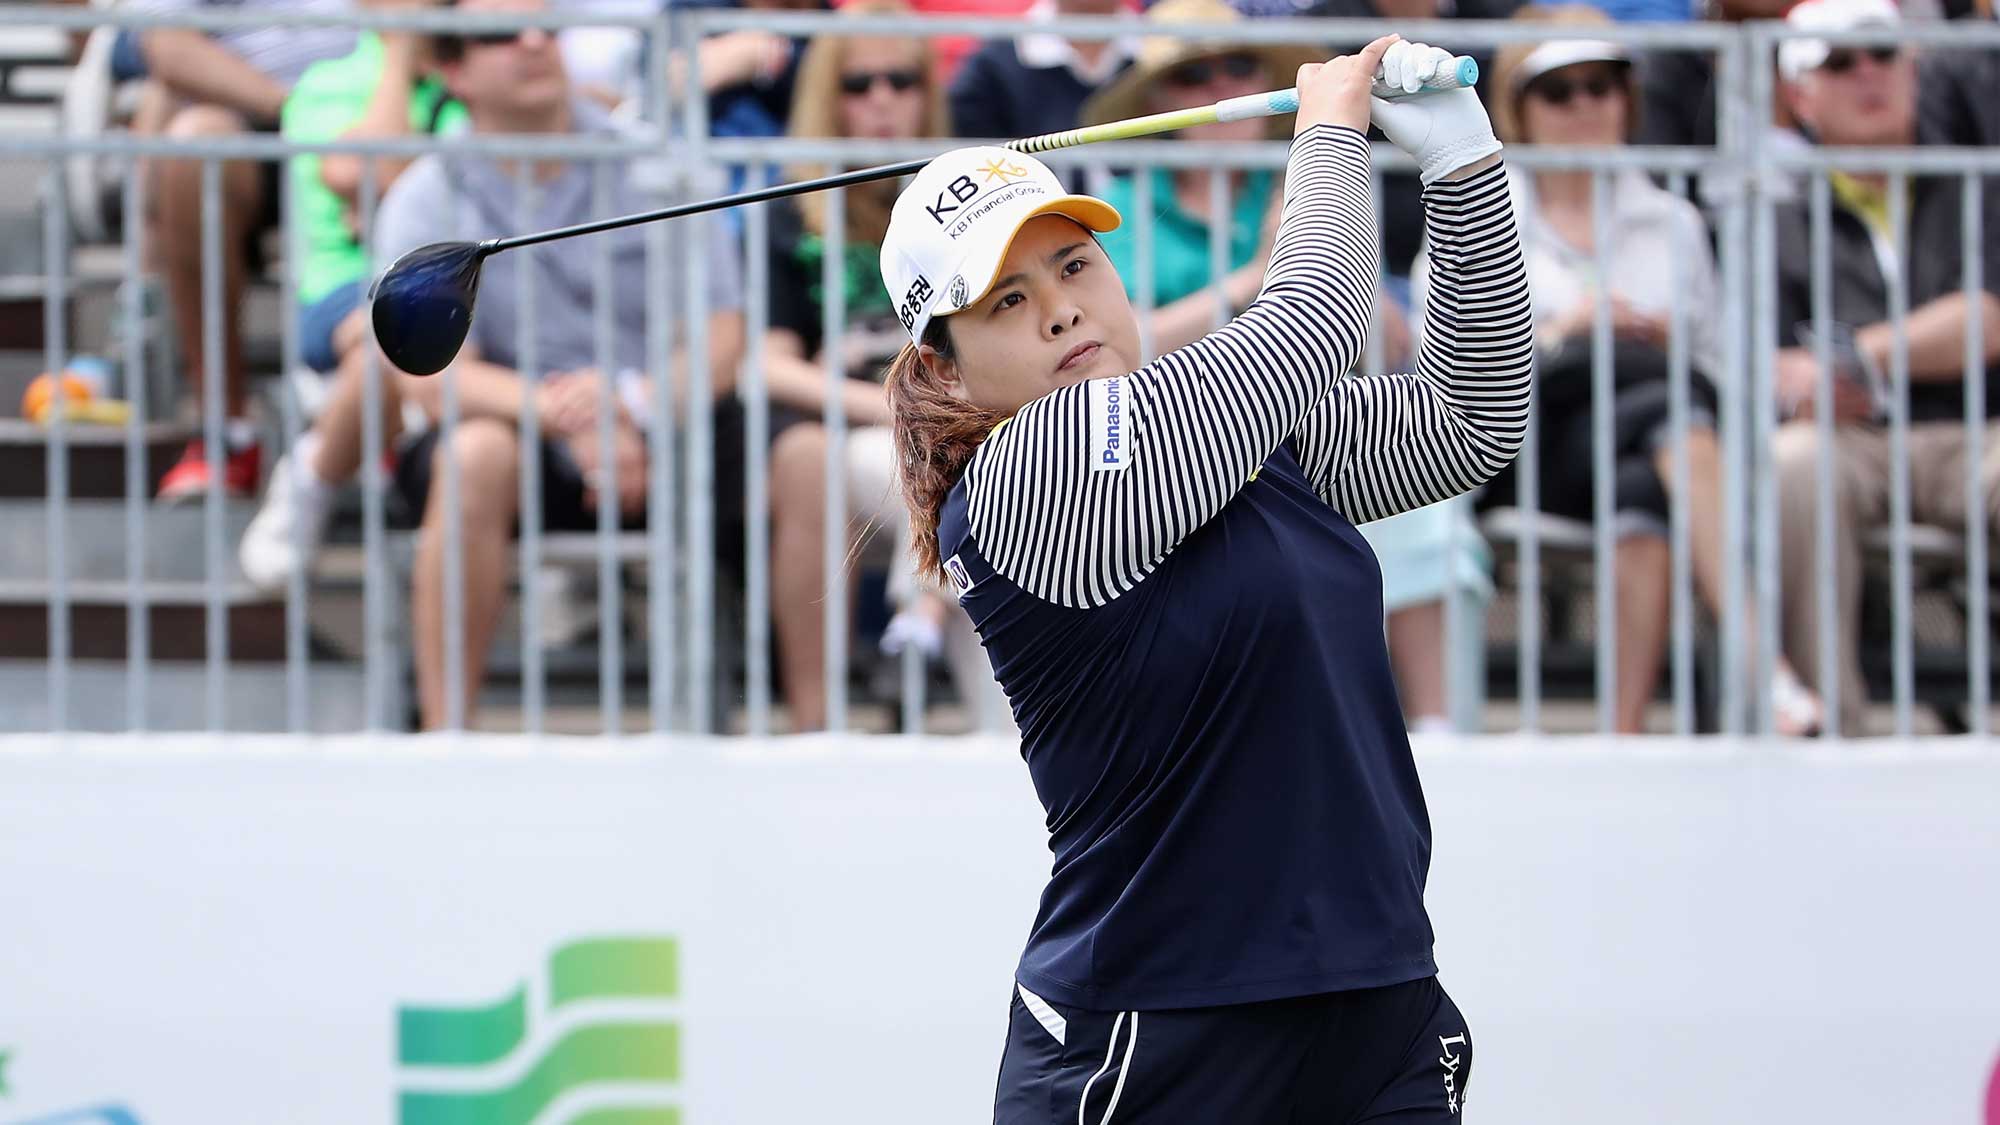 Inbee Park on Day Three of the Founders Cup 